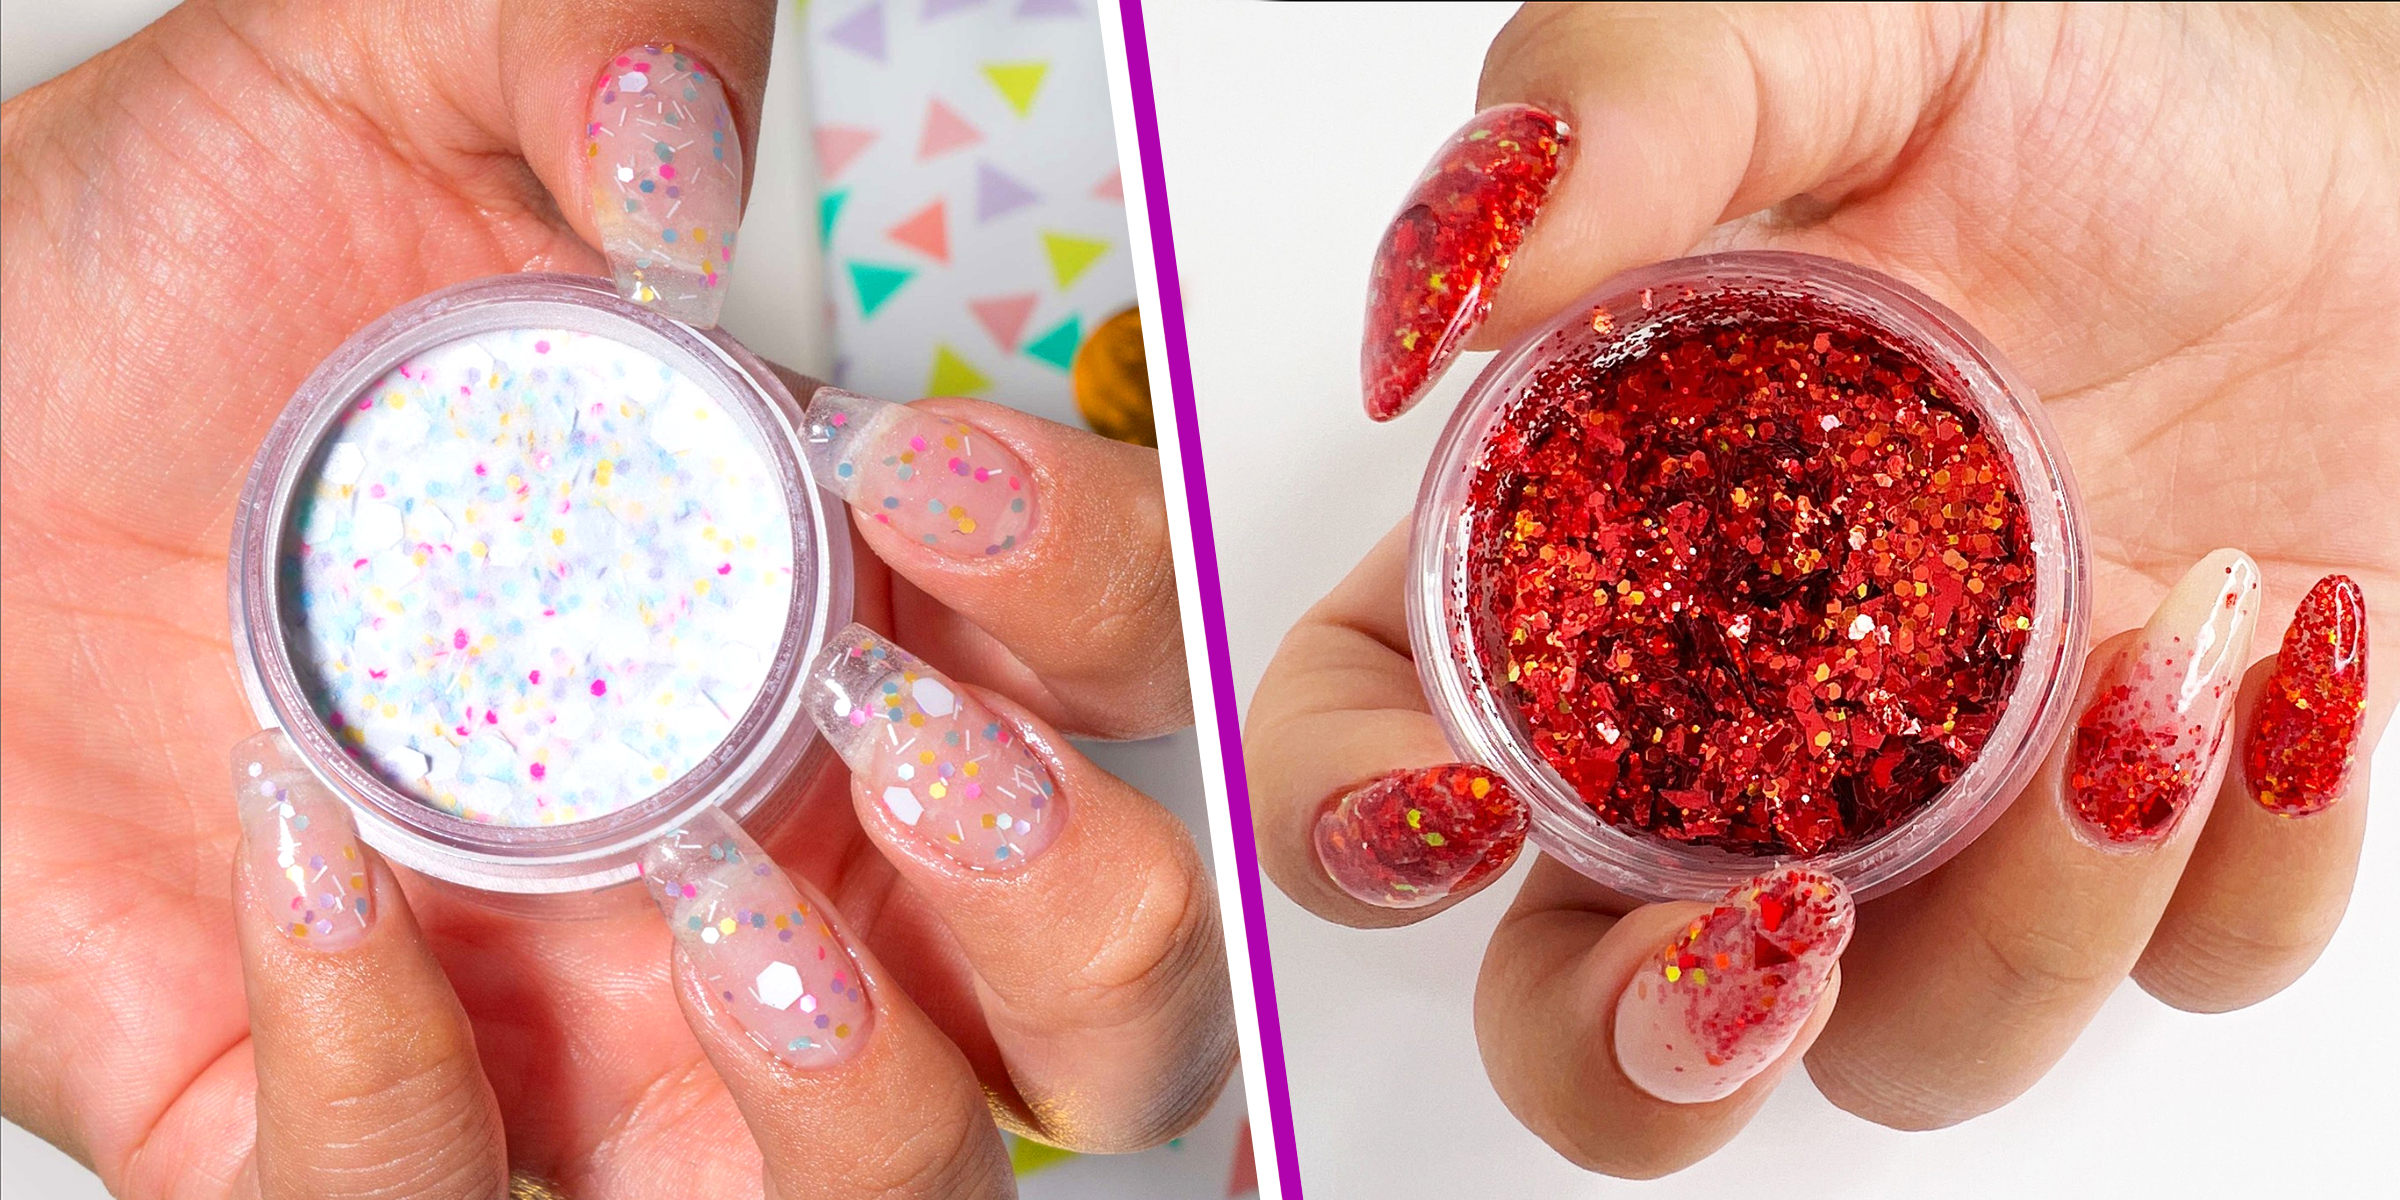 Glitter powder dip nails | Source: Getty Images